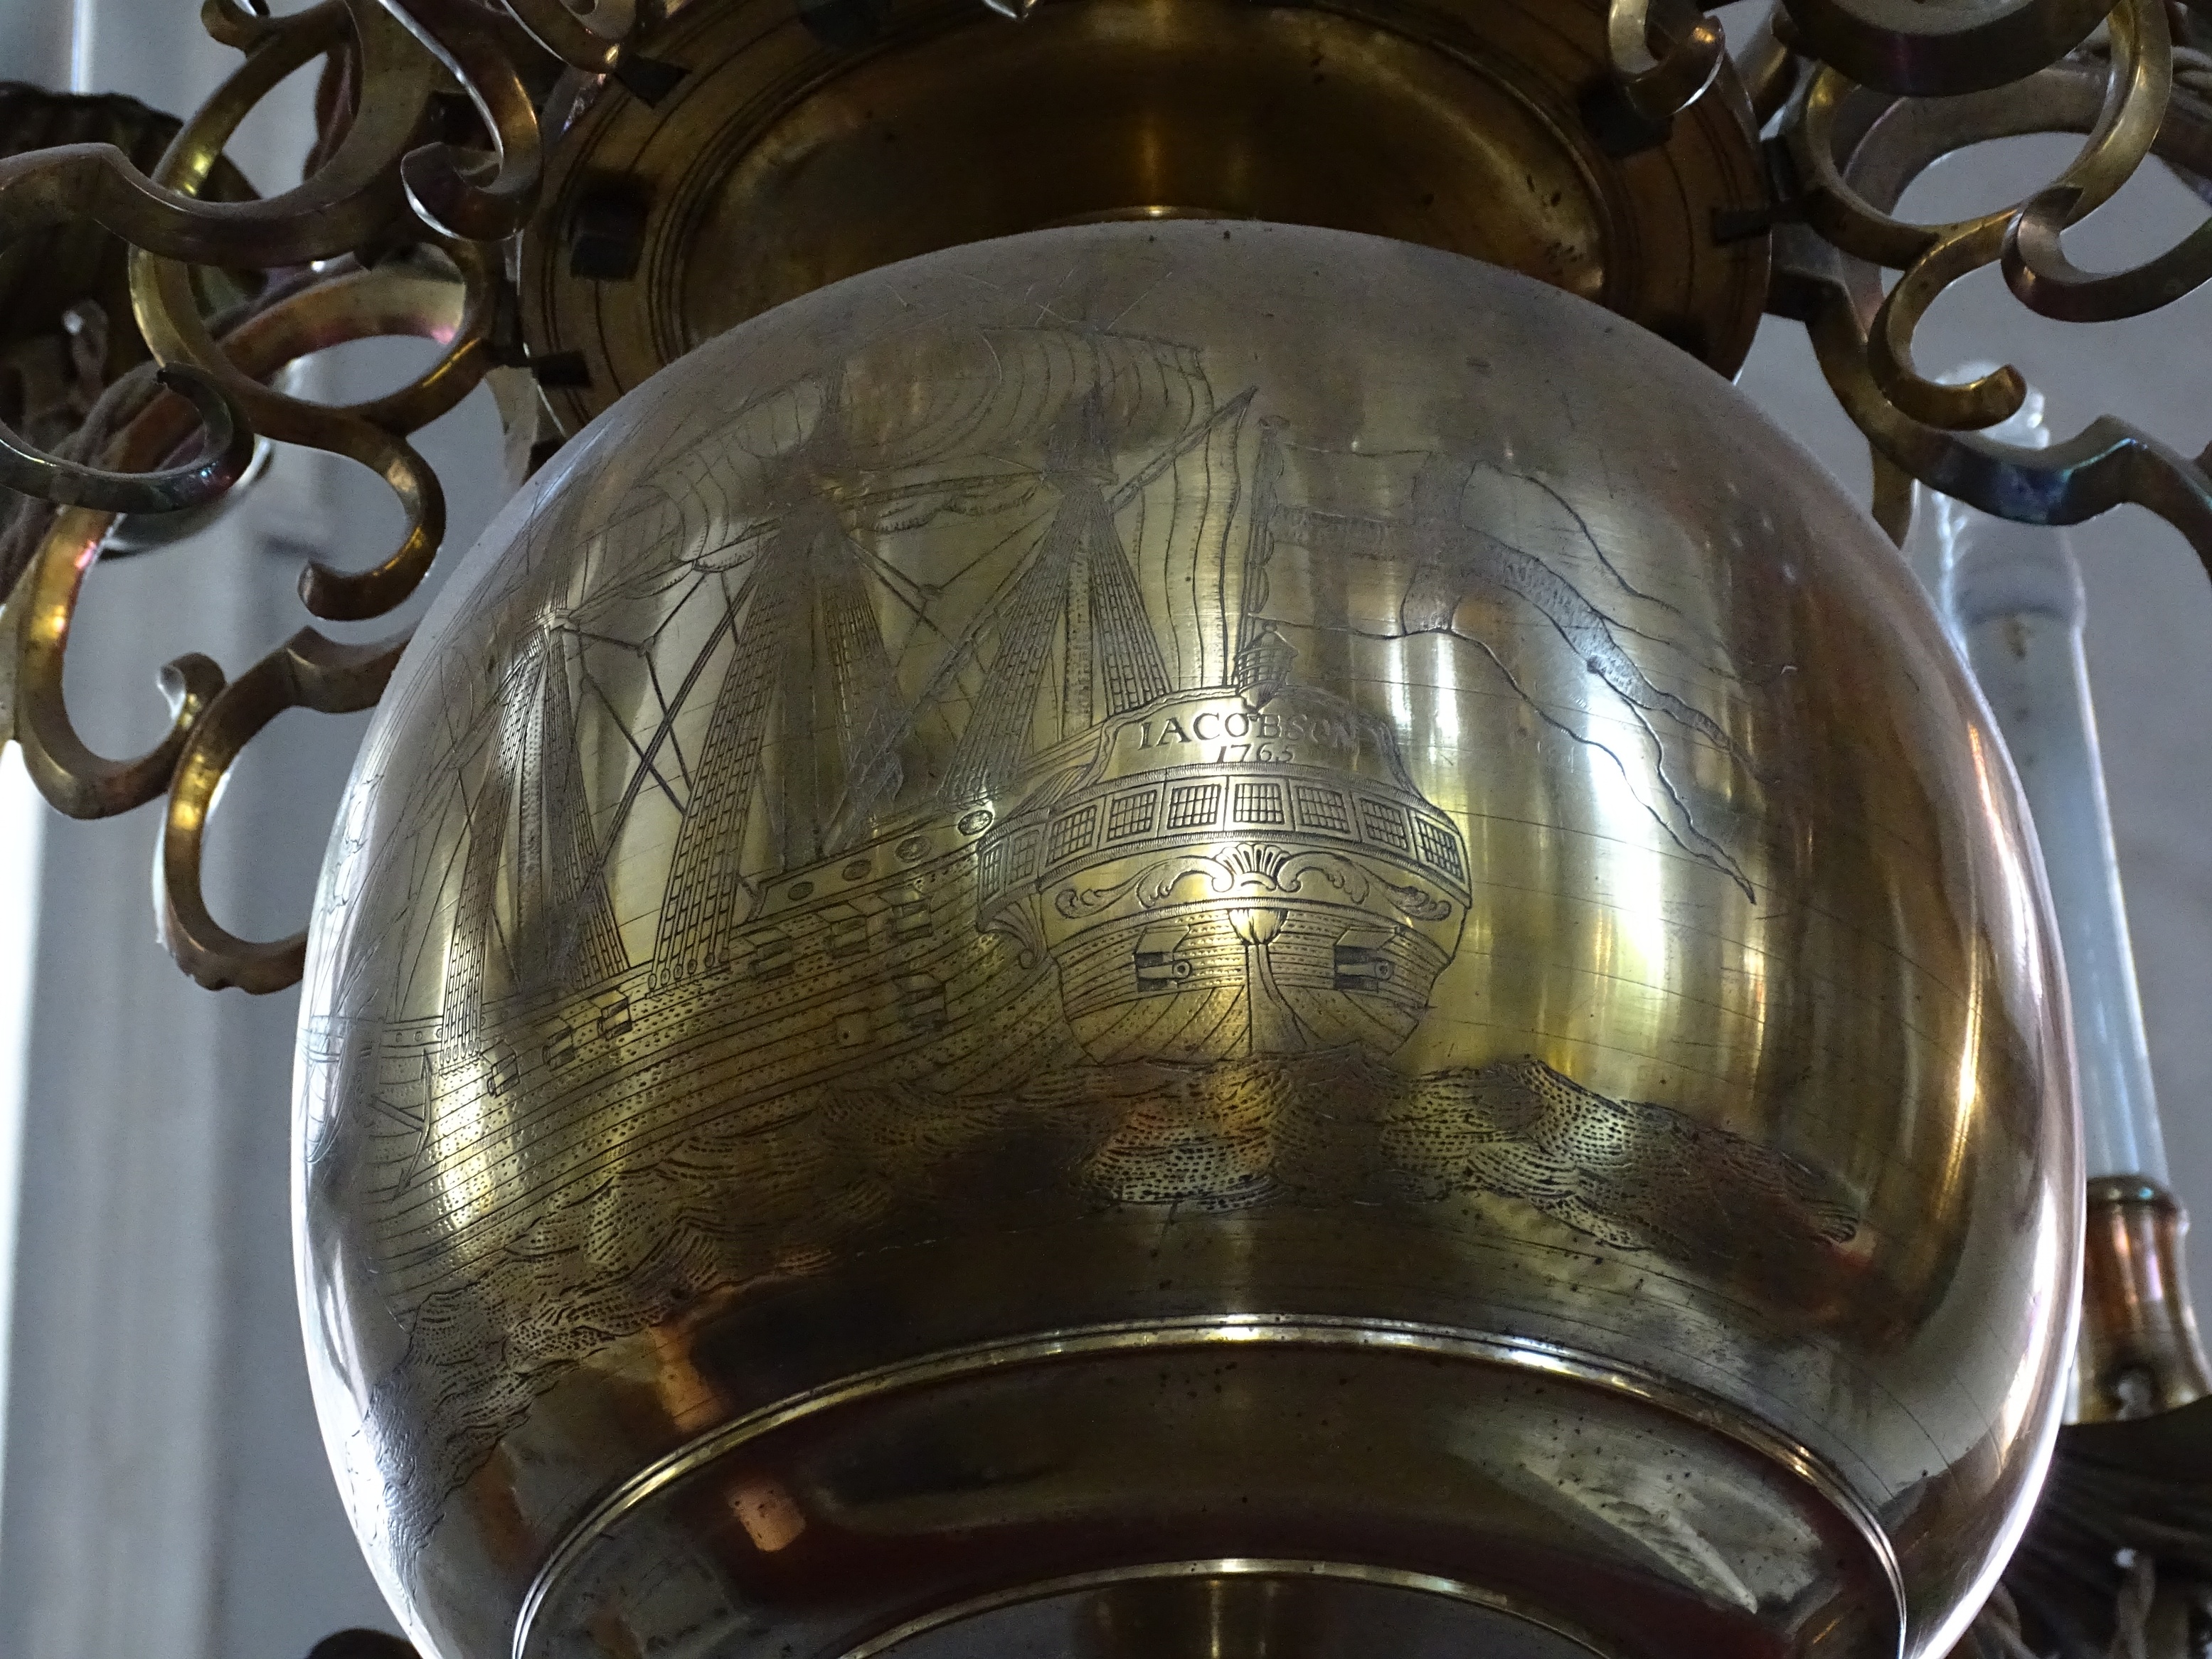 Fragment of the chandelier, 1770, Liepāja Holy Trinity Evangelical Lutheran Cathedral. Photo by Alantė Valtaitė-Gagač, 2021